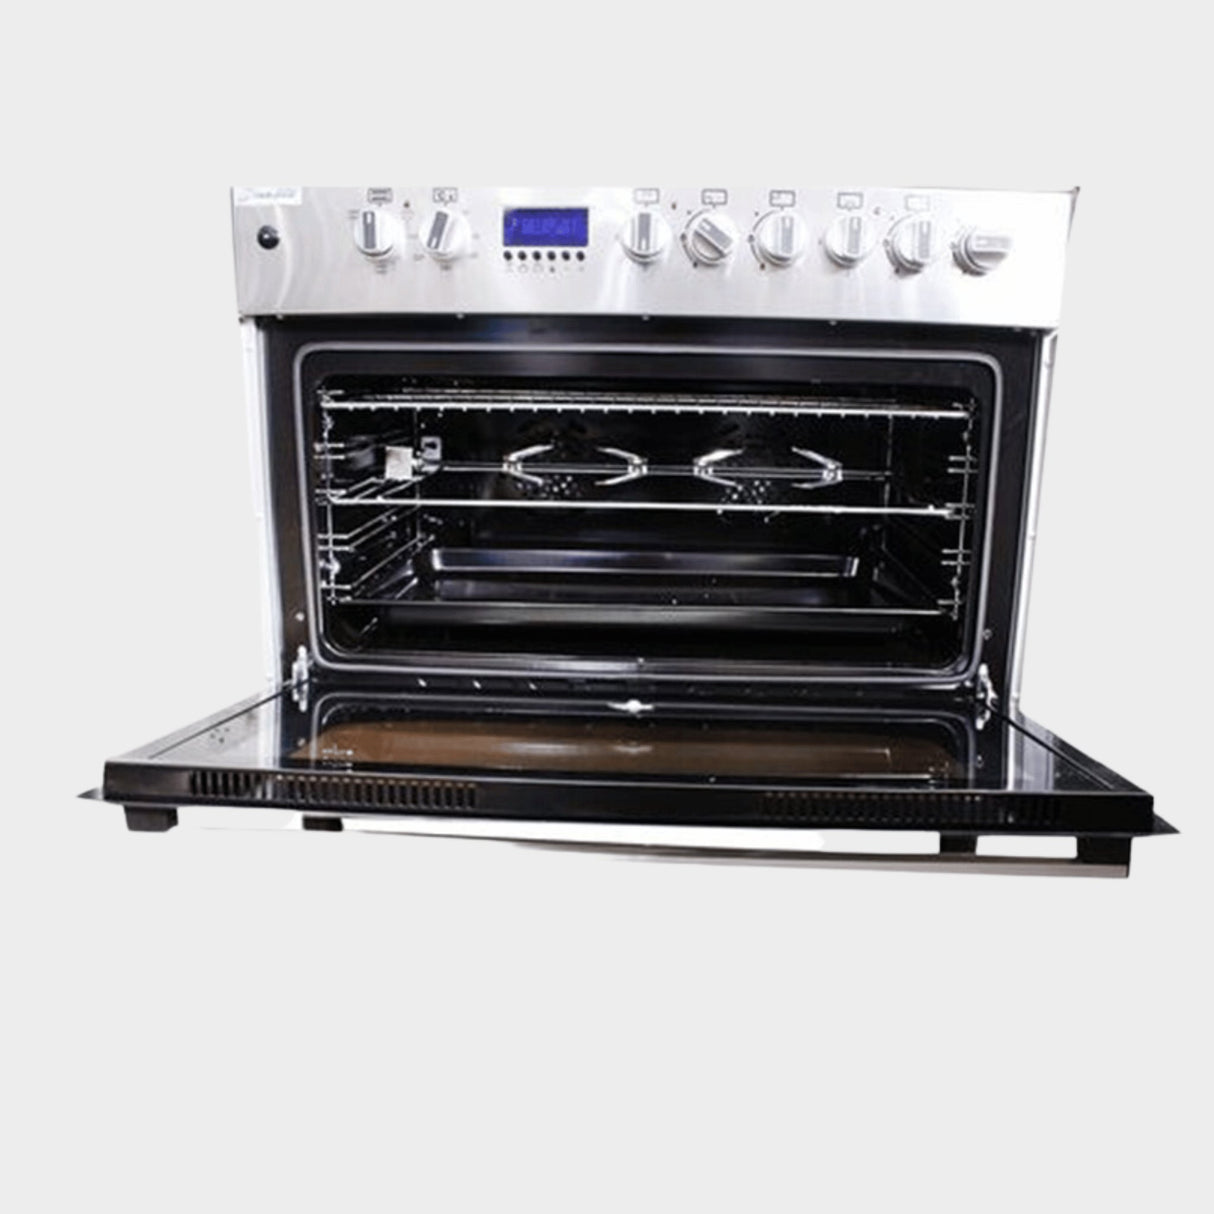 Blueflame Electric Cooker plus Oven 9042ERF - Inox, Silver - KWT Tech Mart